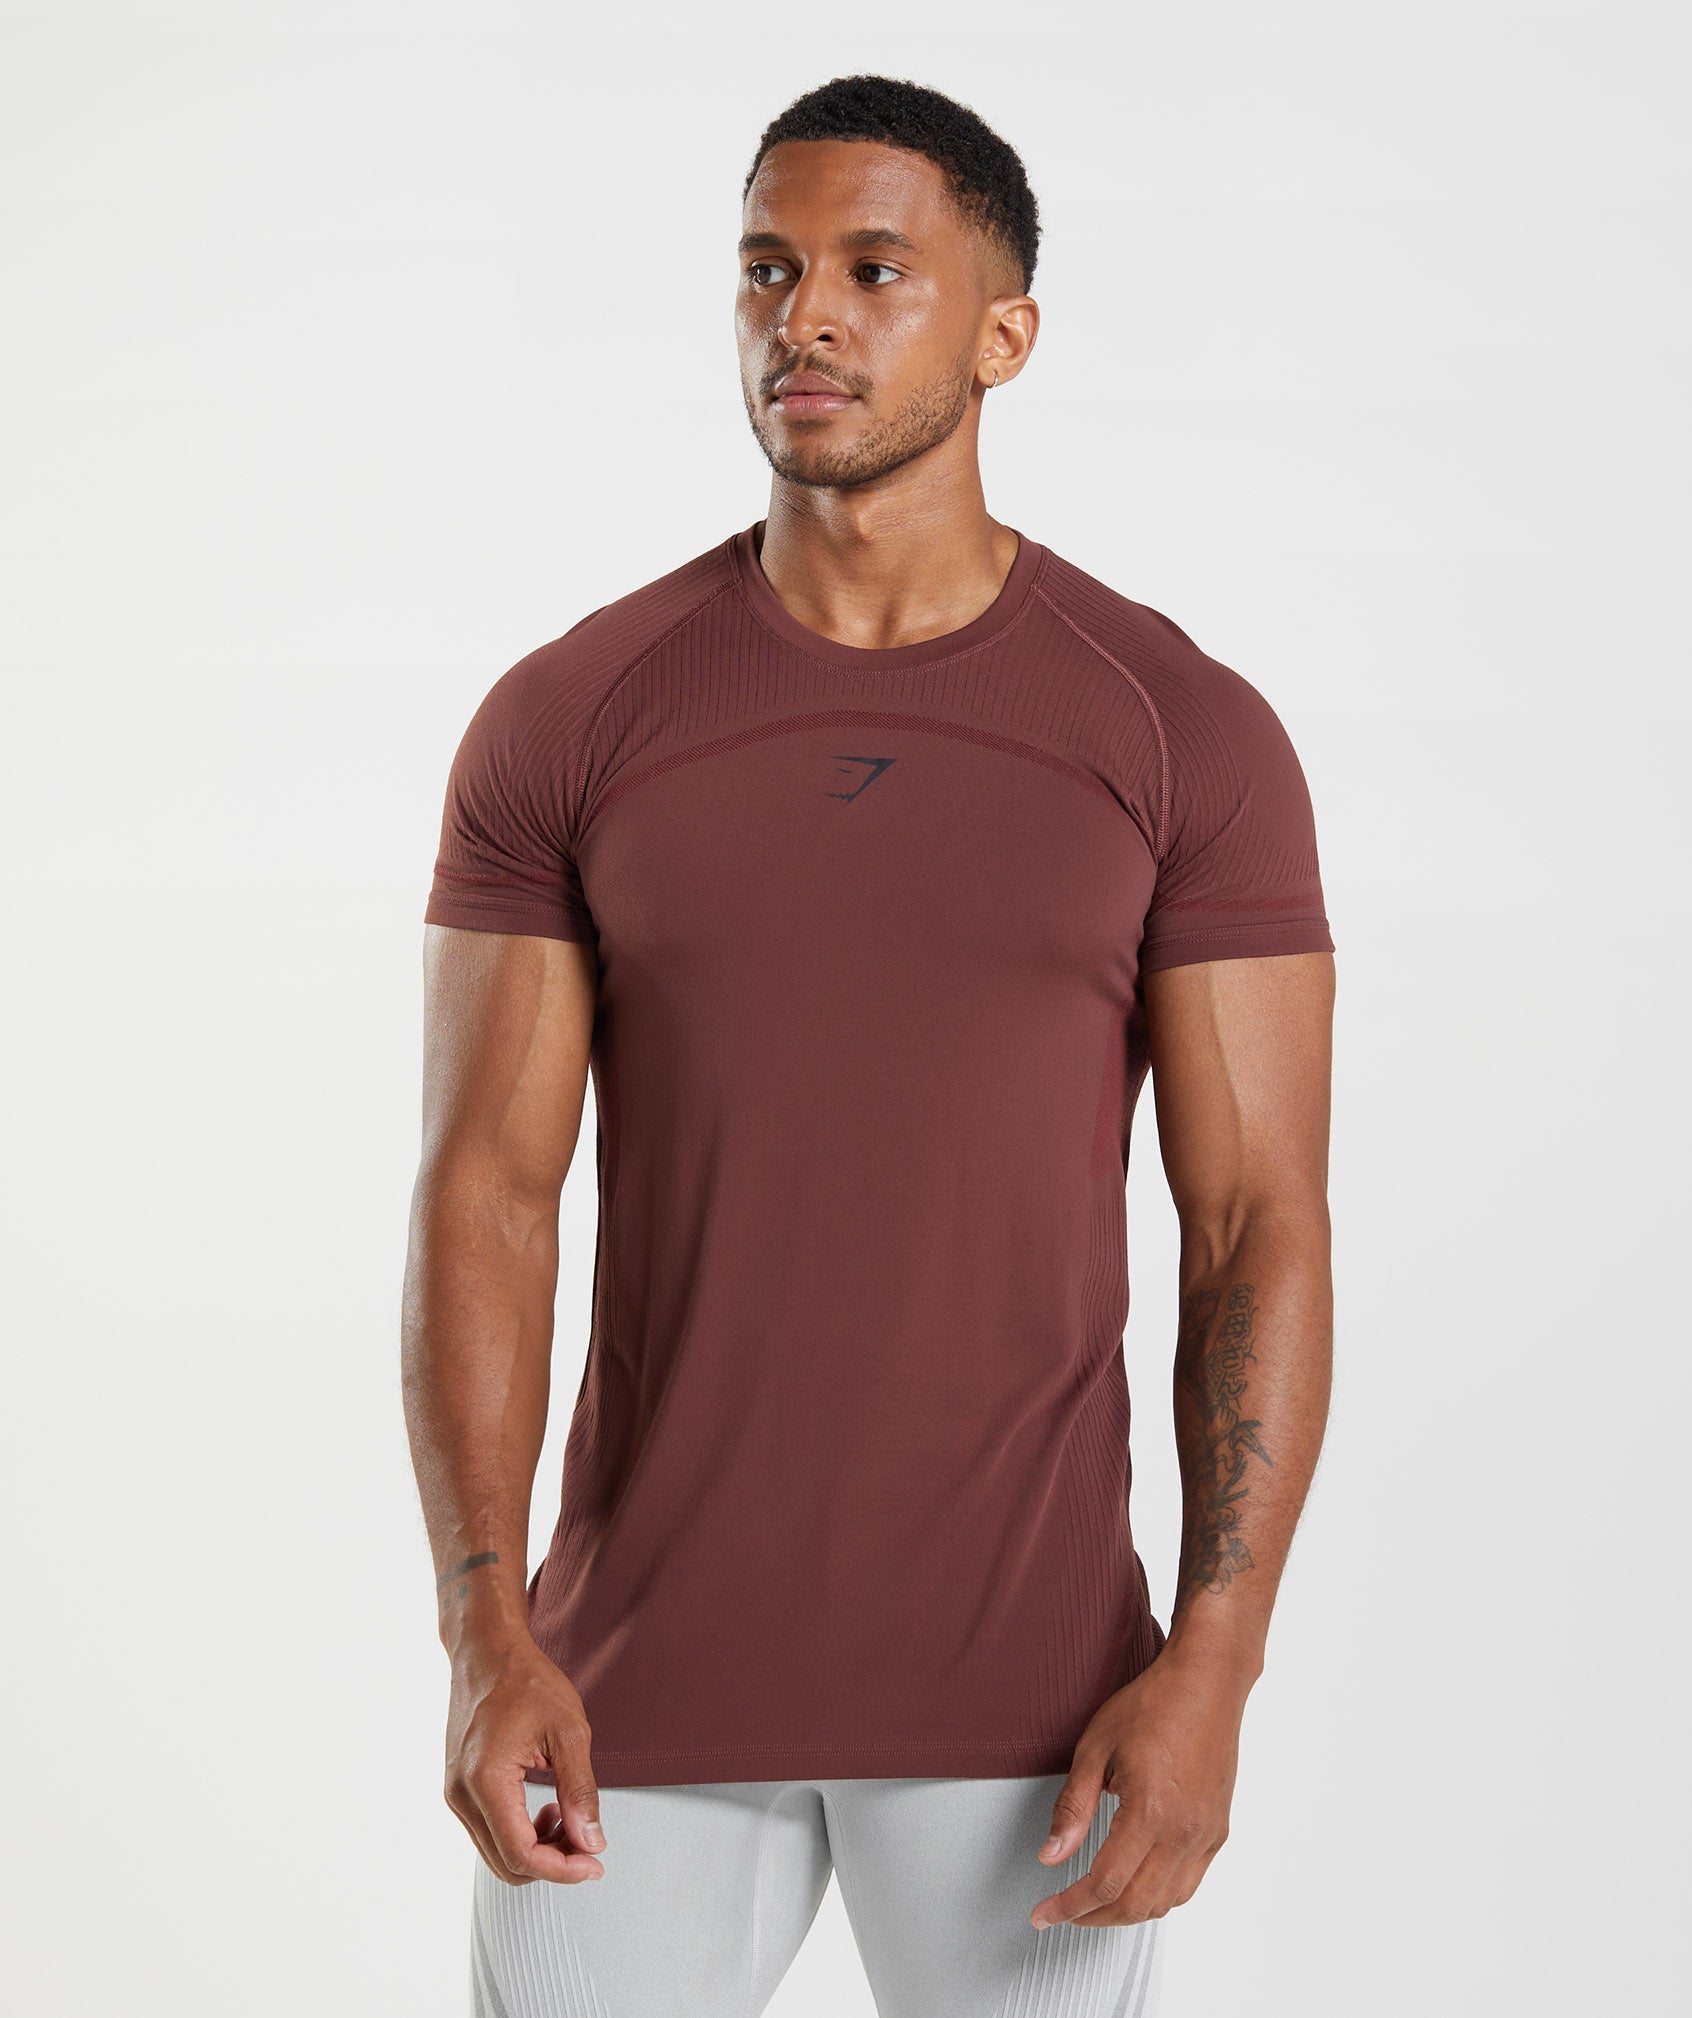 315 Seamless T-Shirt in Cherry Brown - view 1